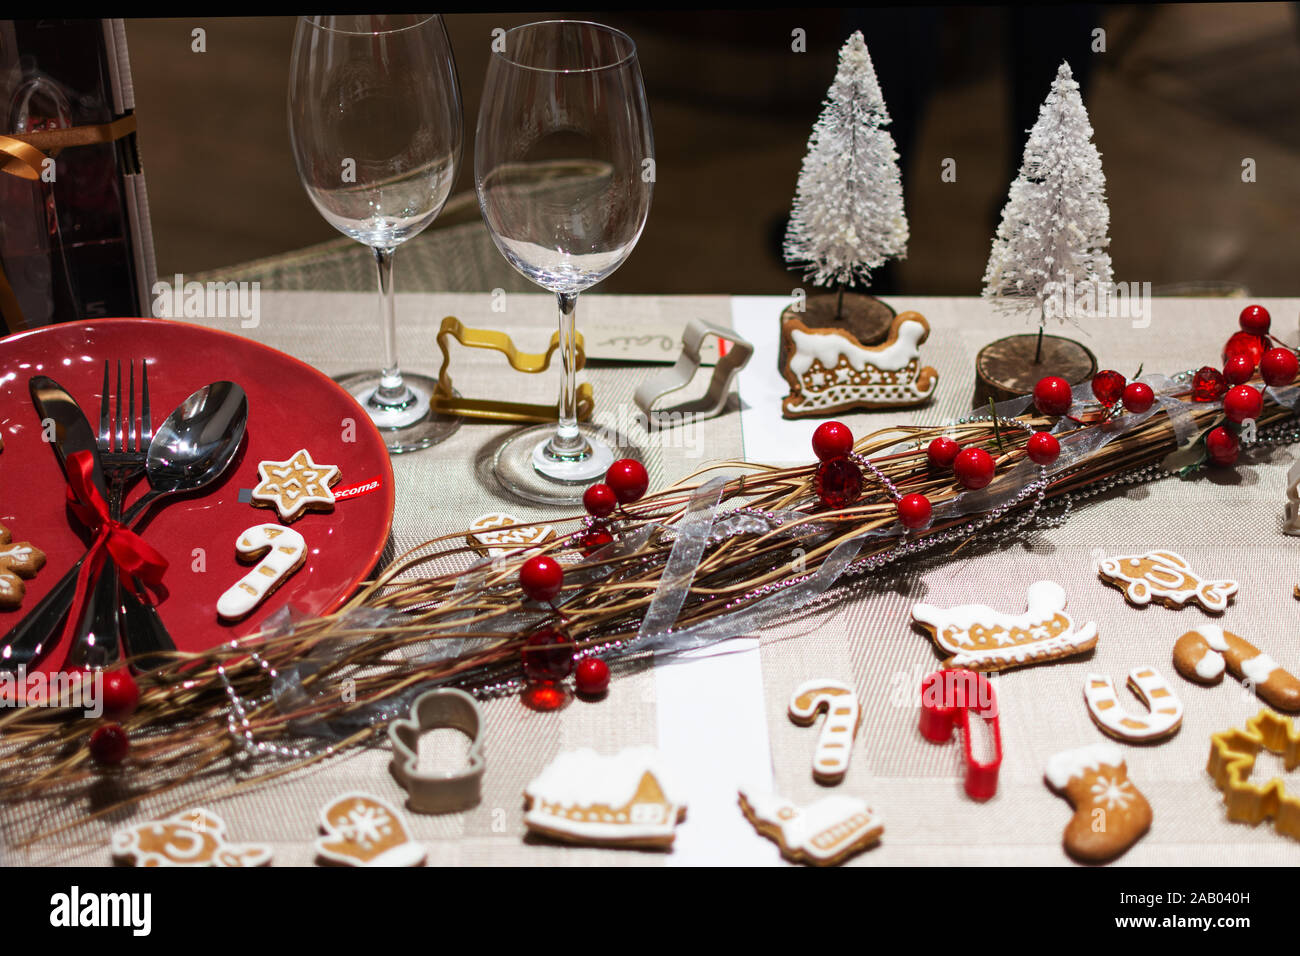 Christmas Table Setting With Ginger Cookies And Holly Berries Decorations Christmas Holiday Table Decorations Stock Photo Alamy